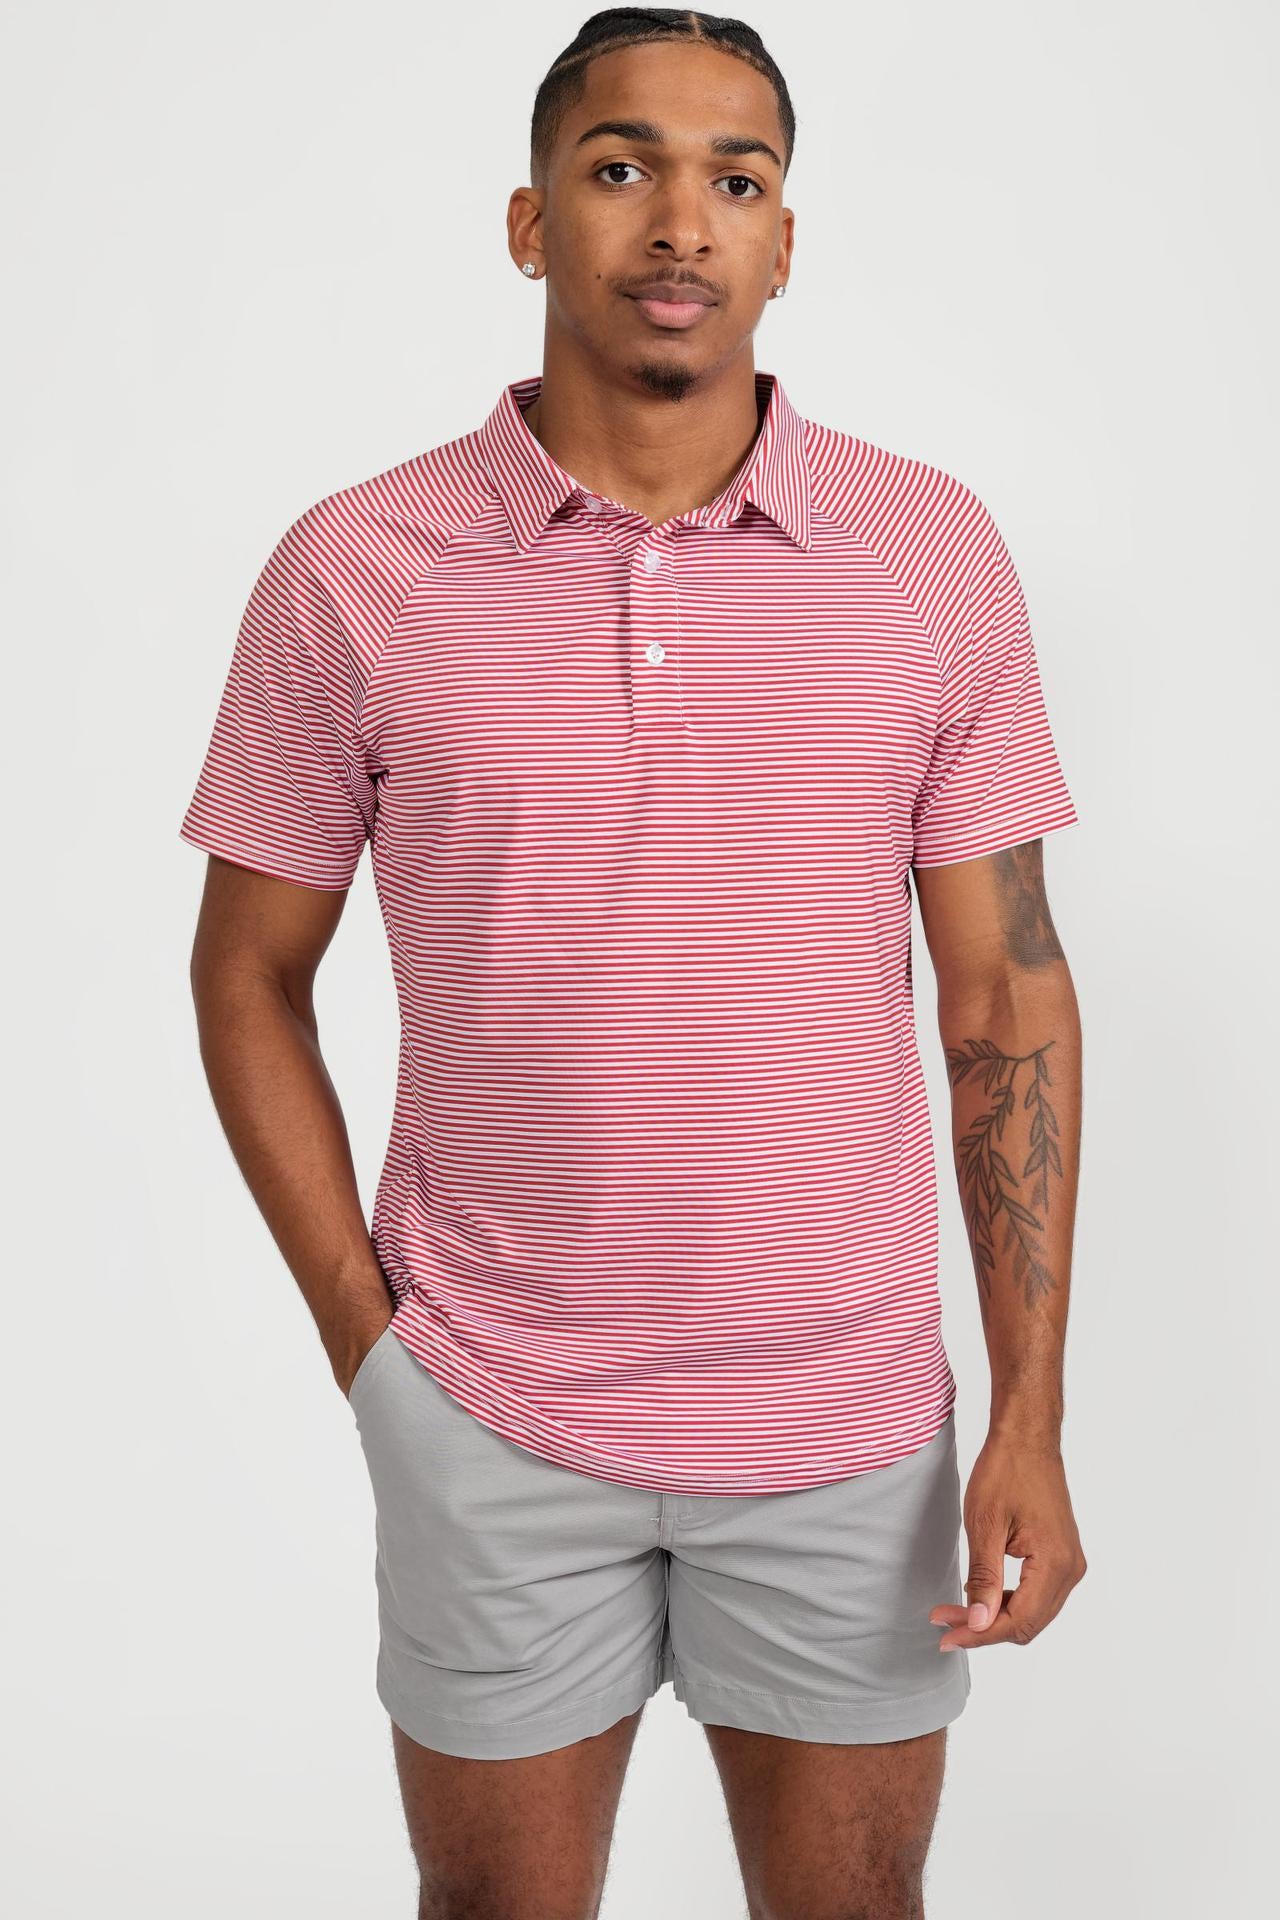 Men's Cooling Performance Golf Polo Shirt Red Stripes